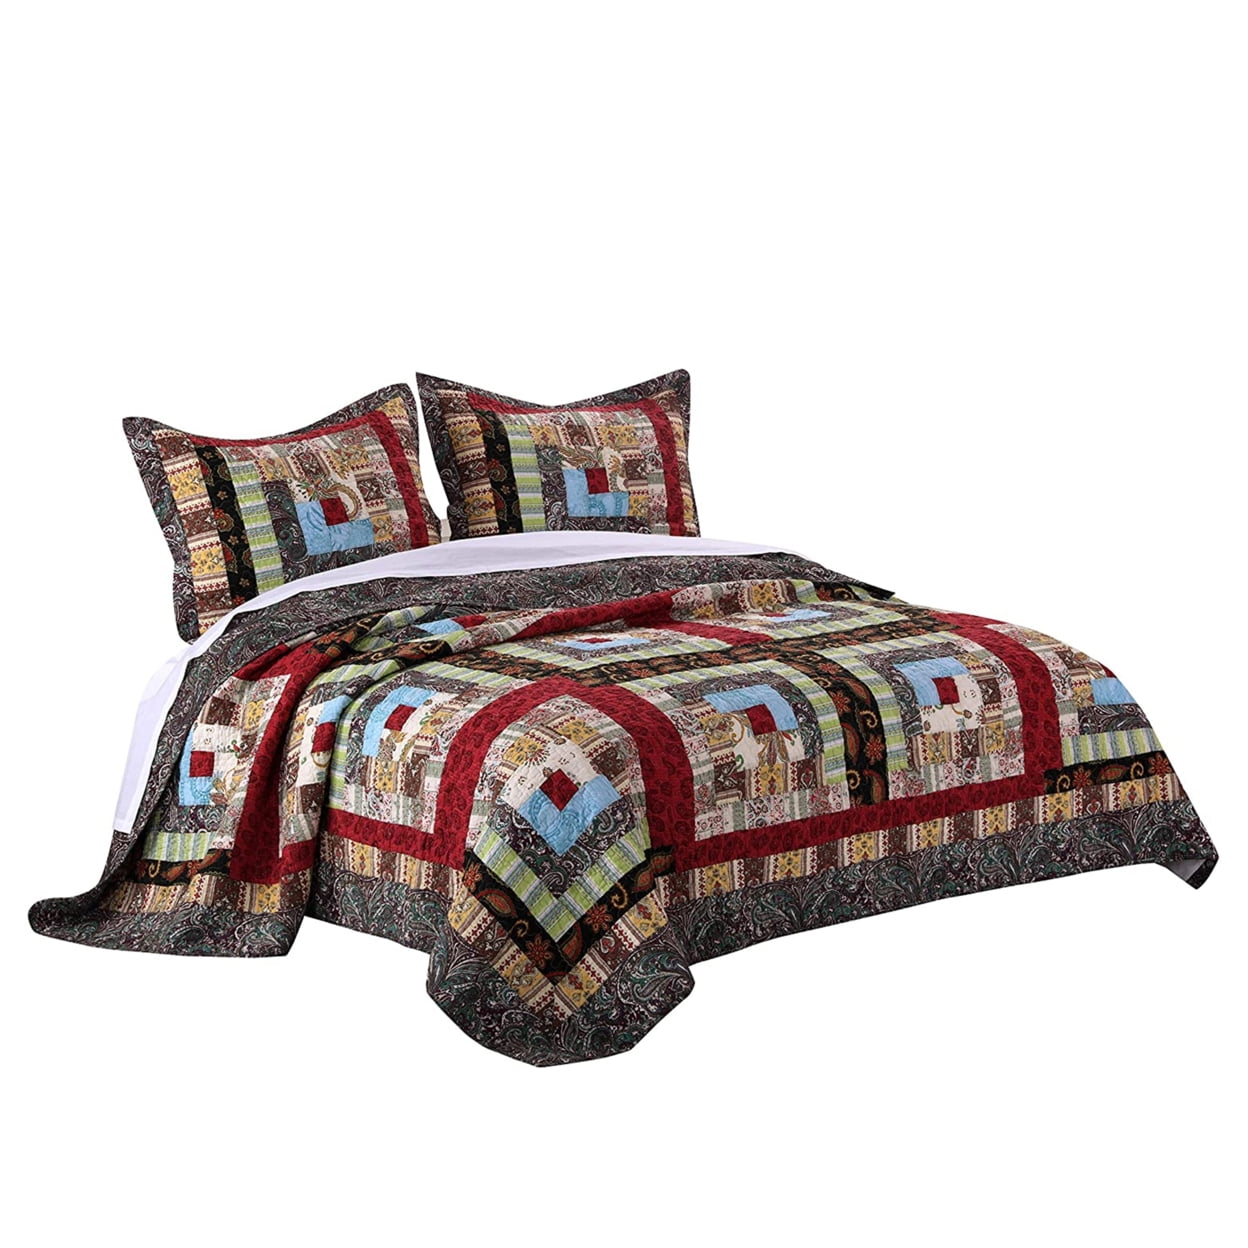 Thames Cotton Quilt Set with Log Cabin Pattern, Multi Color - King Size - 3 Piece -  NewestEdition, NE2530879